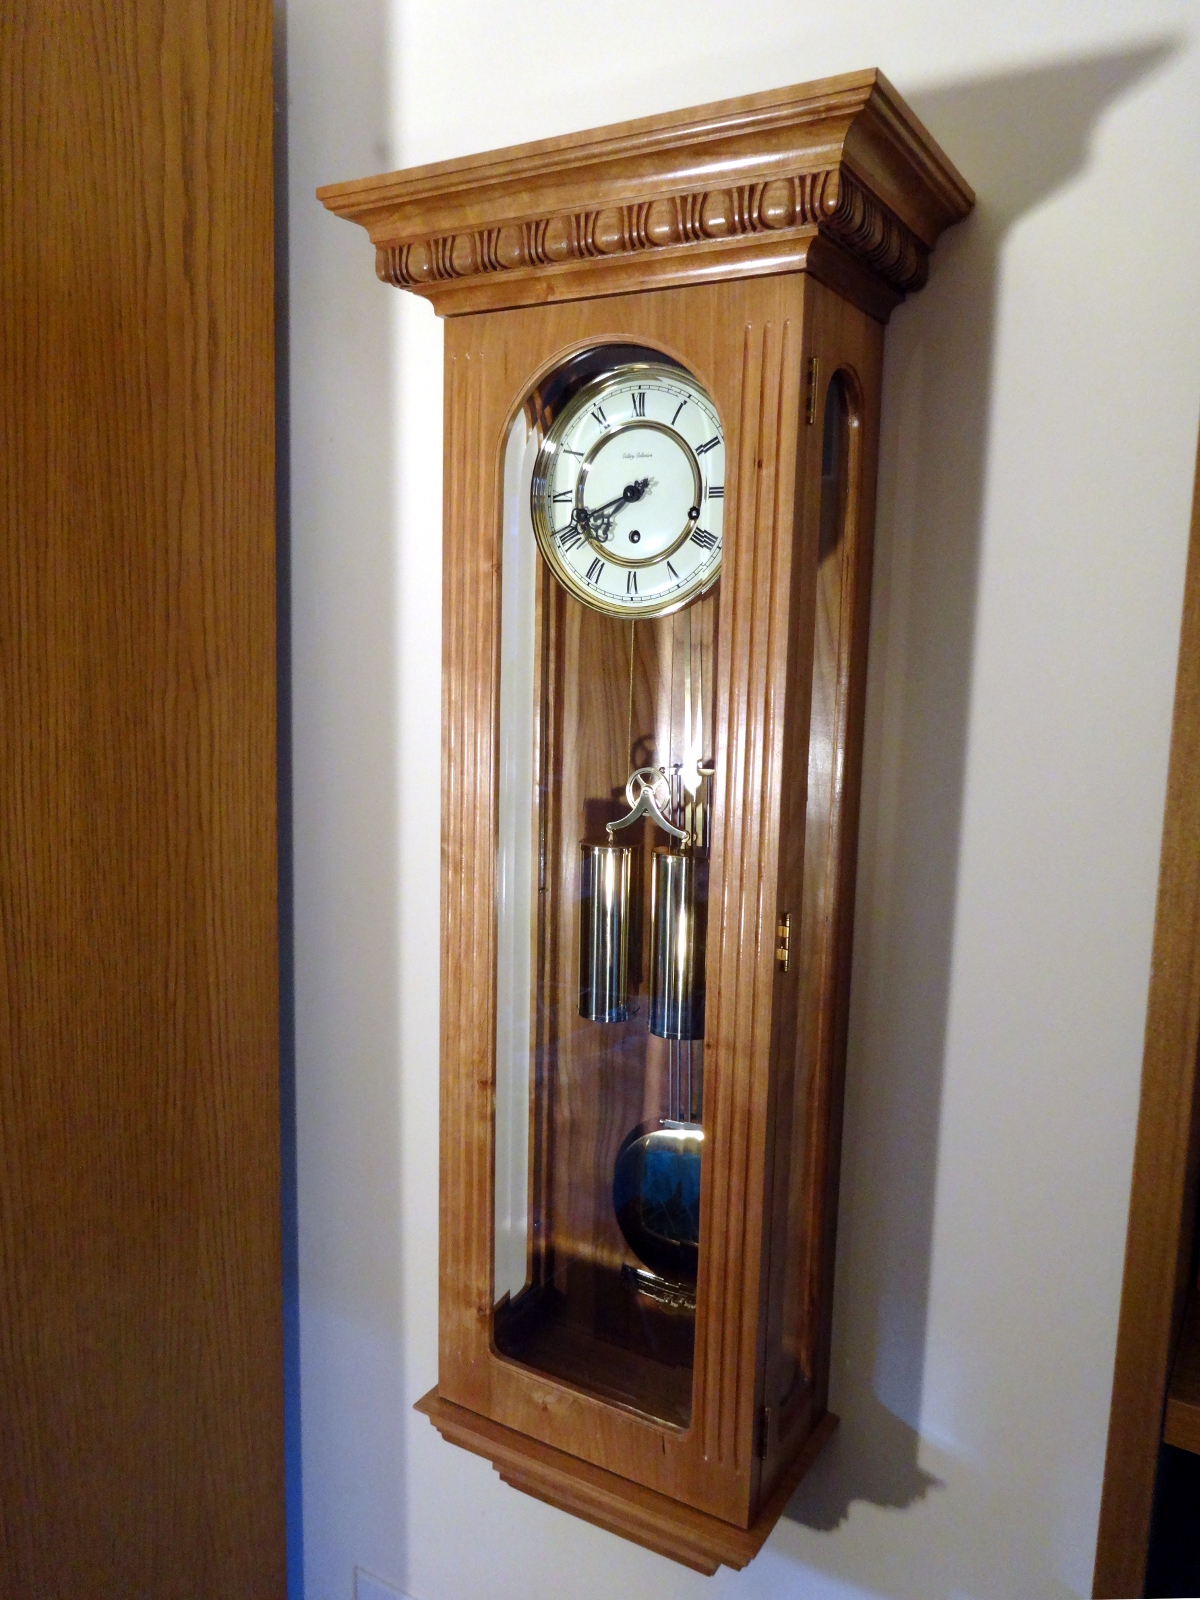 photo of the regulator clock from right side